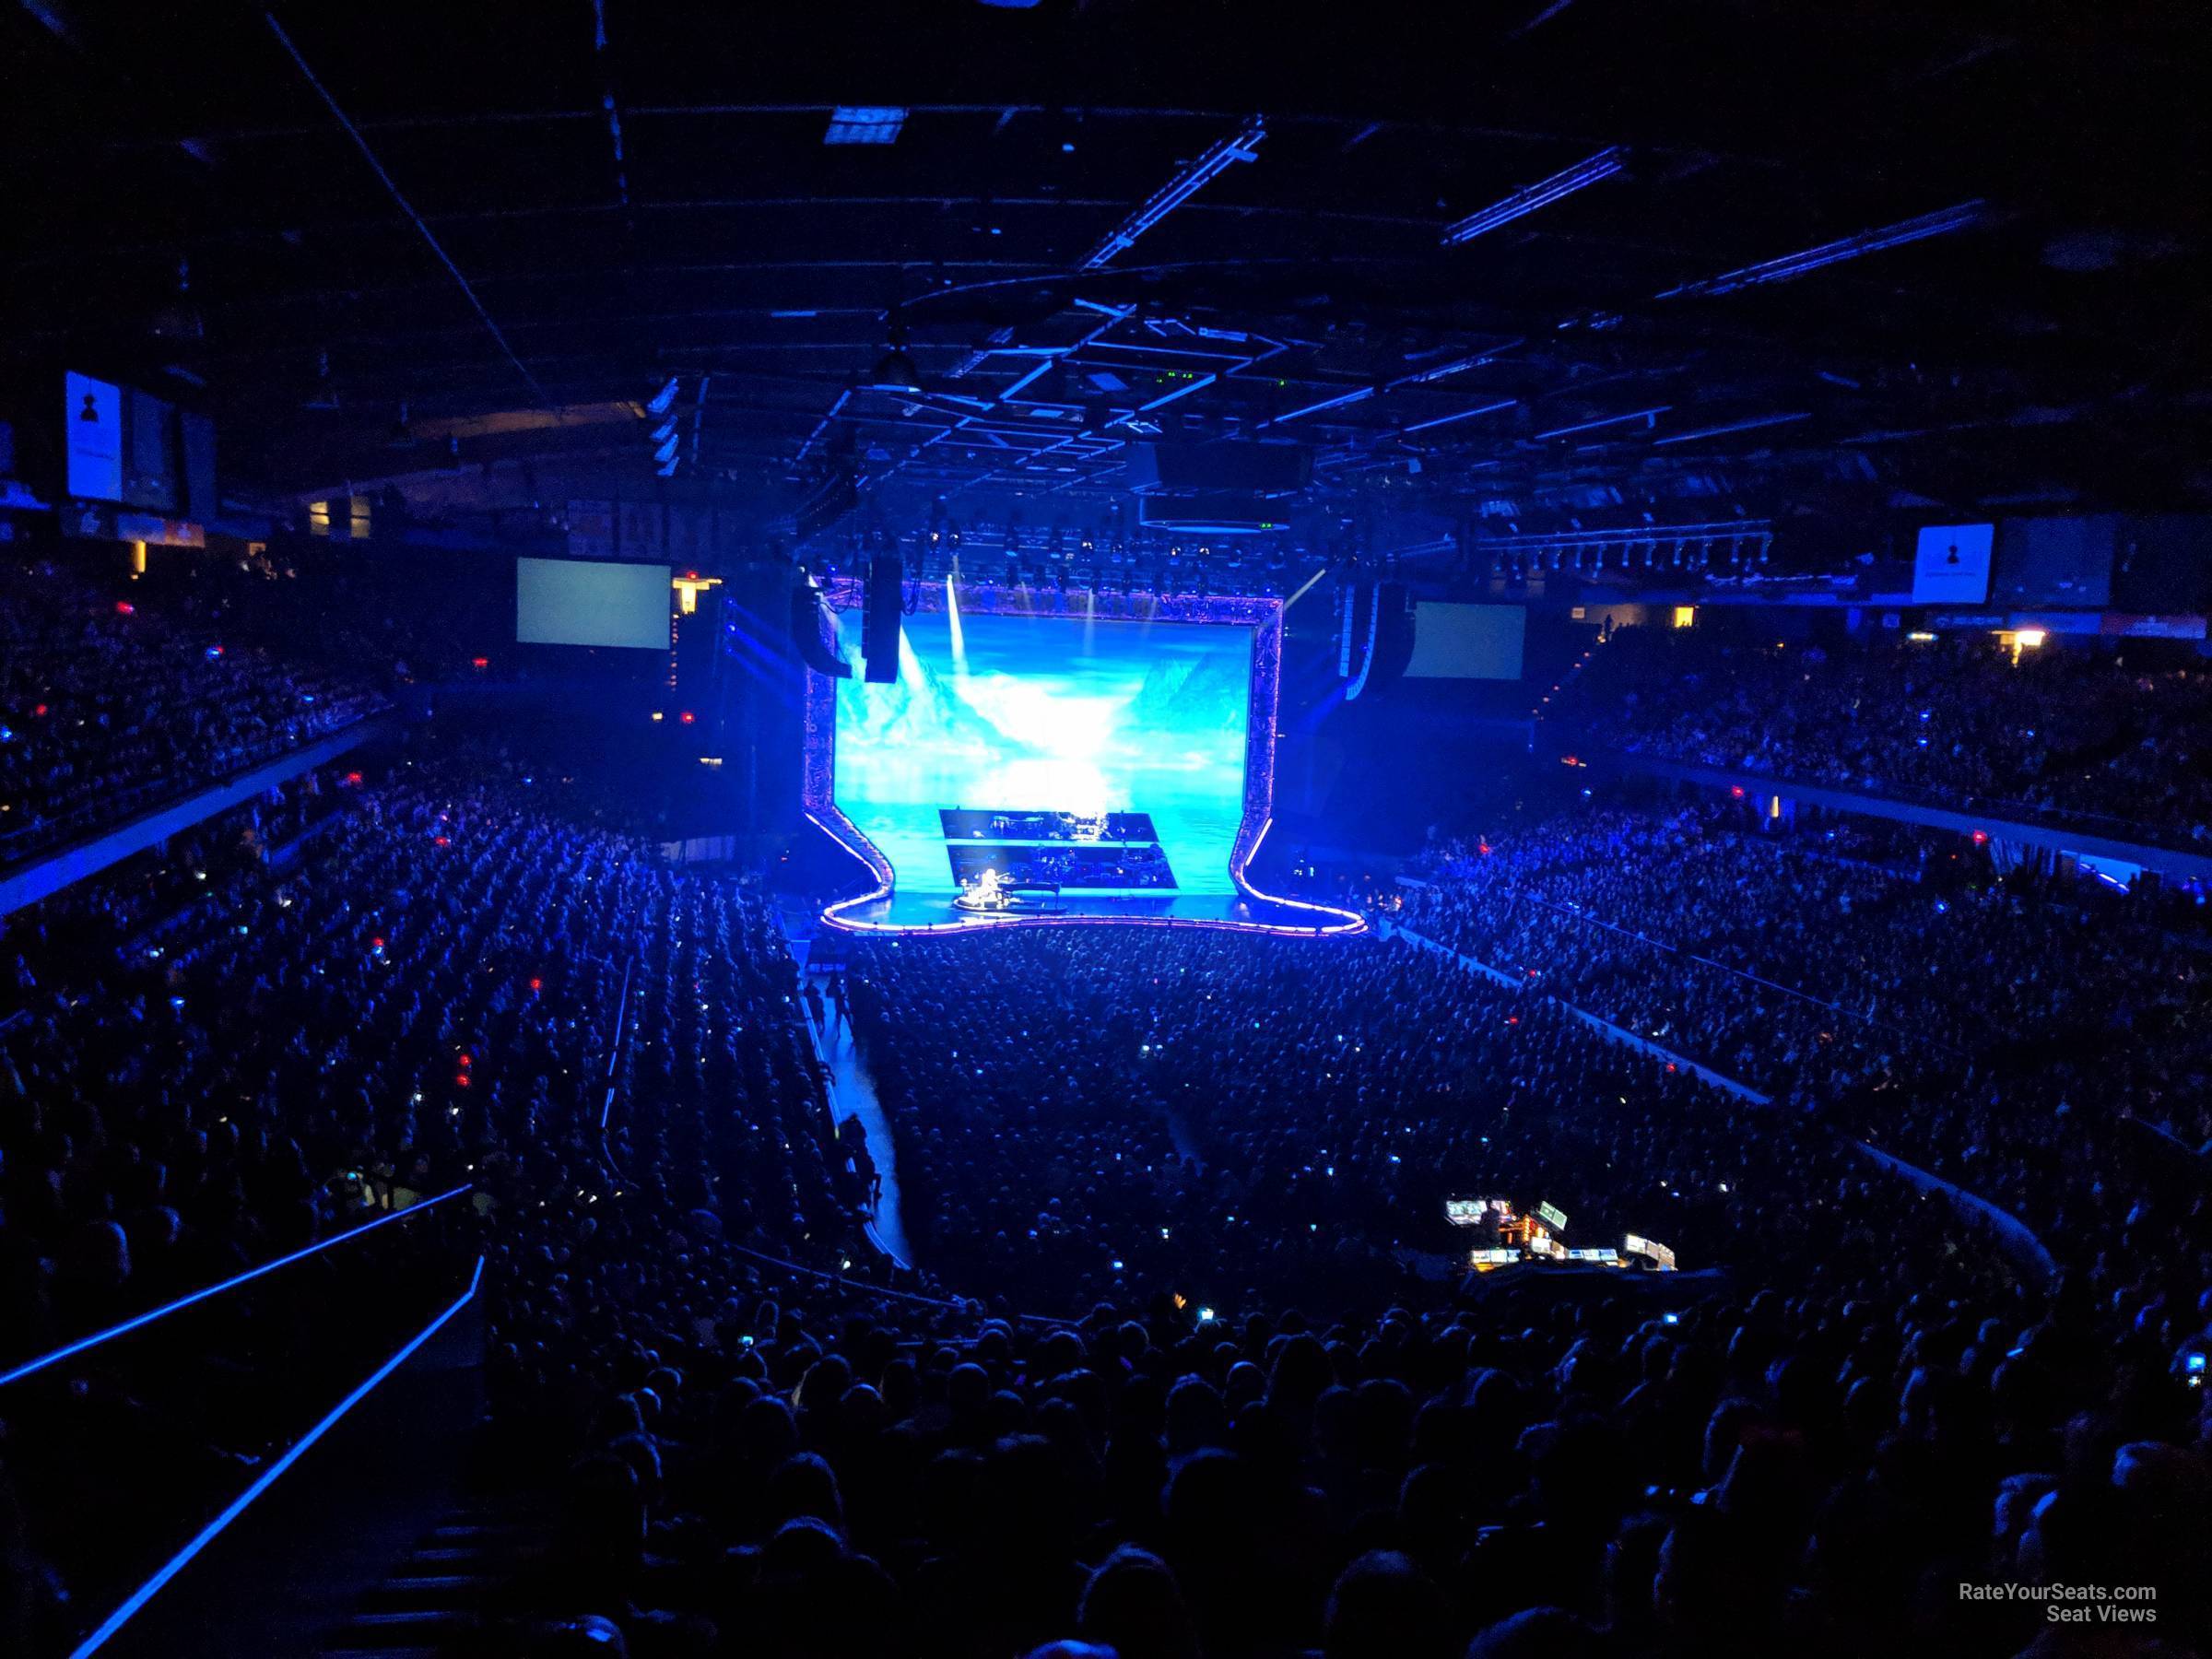 head-on concert view at Allstate Arena